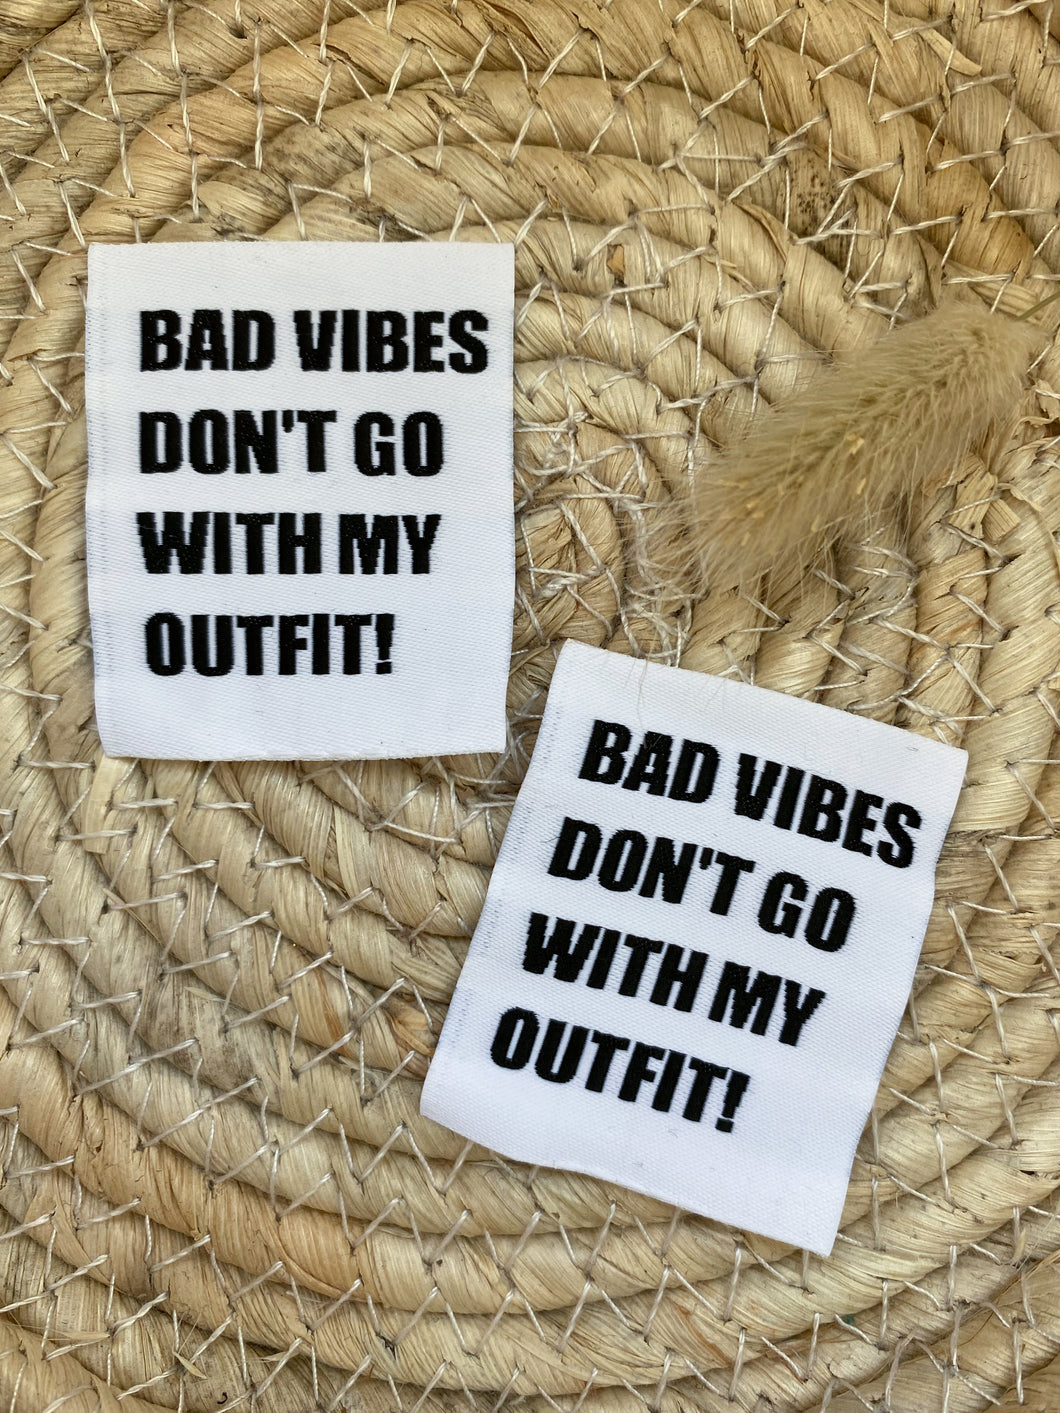 Bad Vibes dont go ... - Web Label